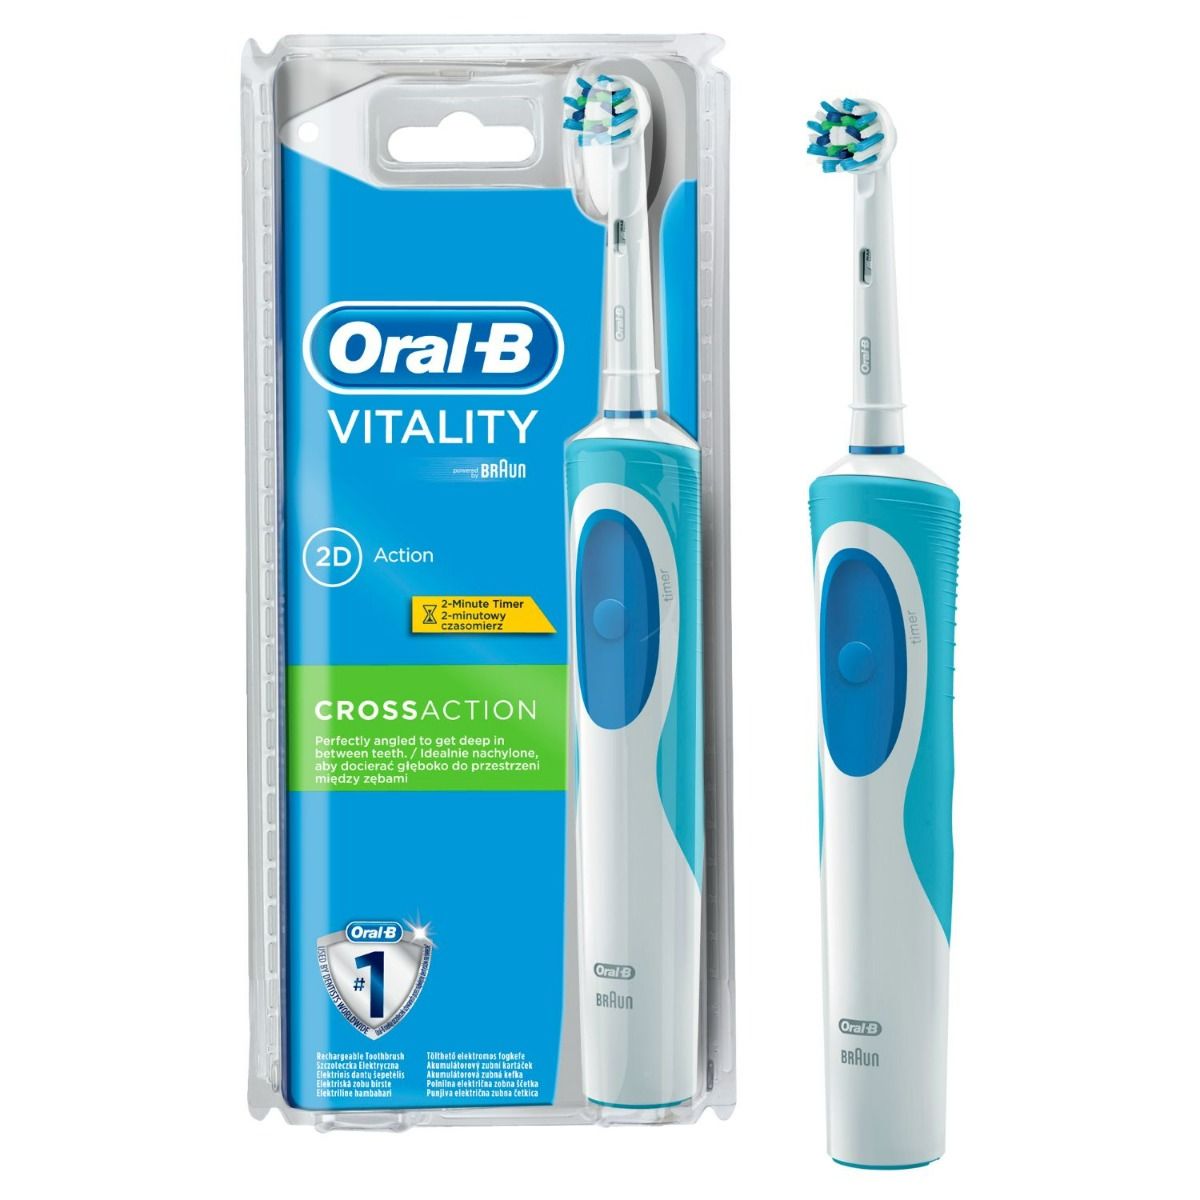 Buy Oral-B Vitality Cross Action Rechargeable Toothbrush, 1 Count Online